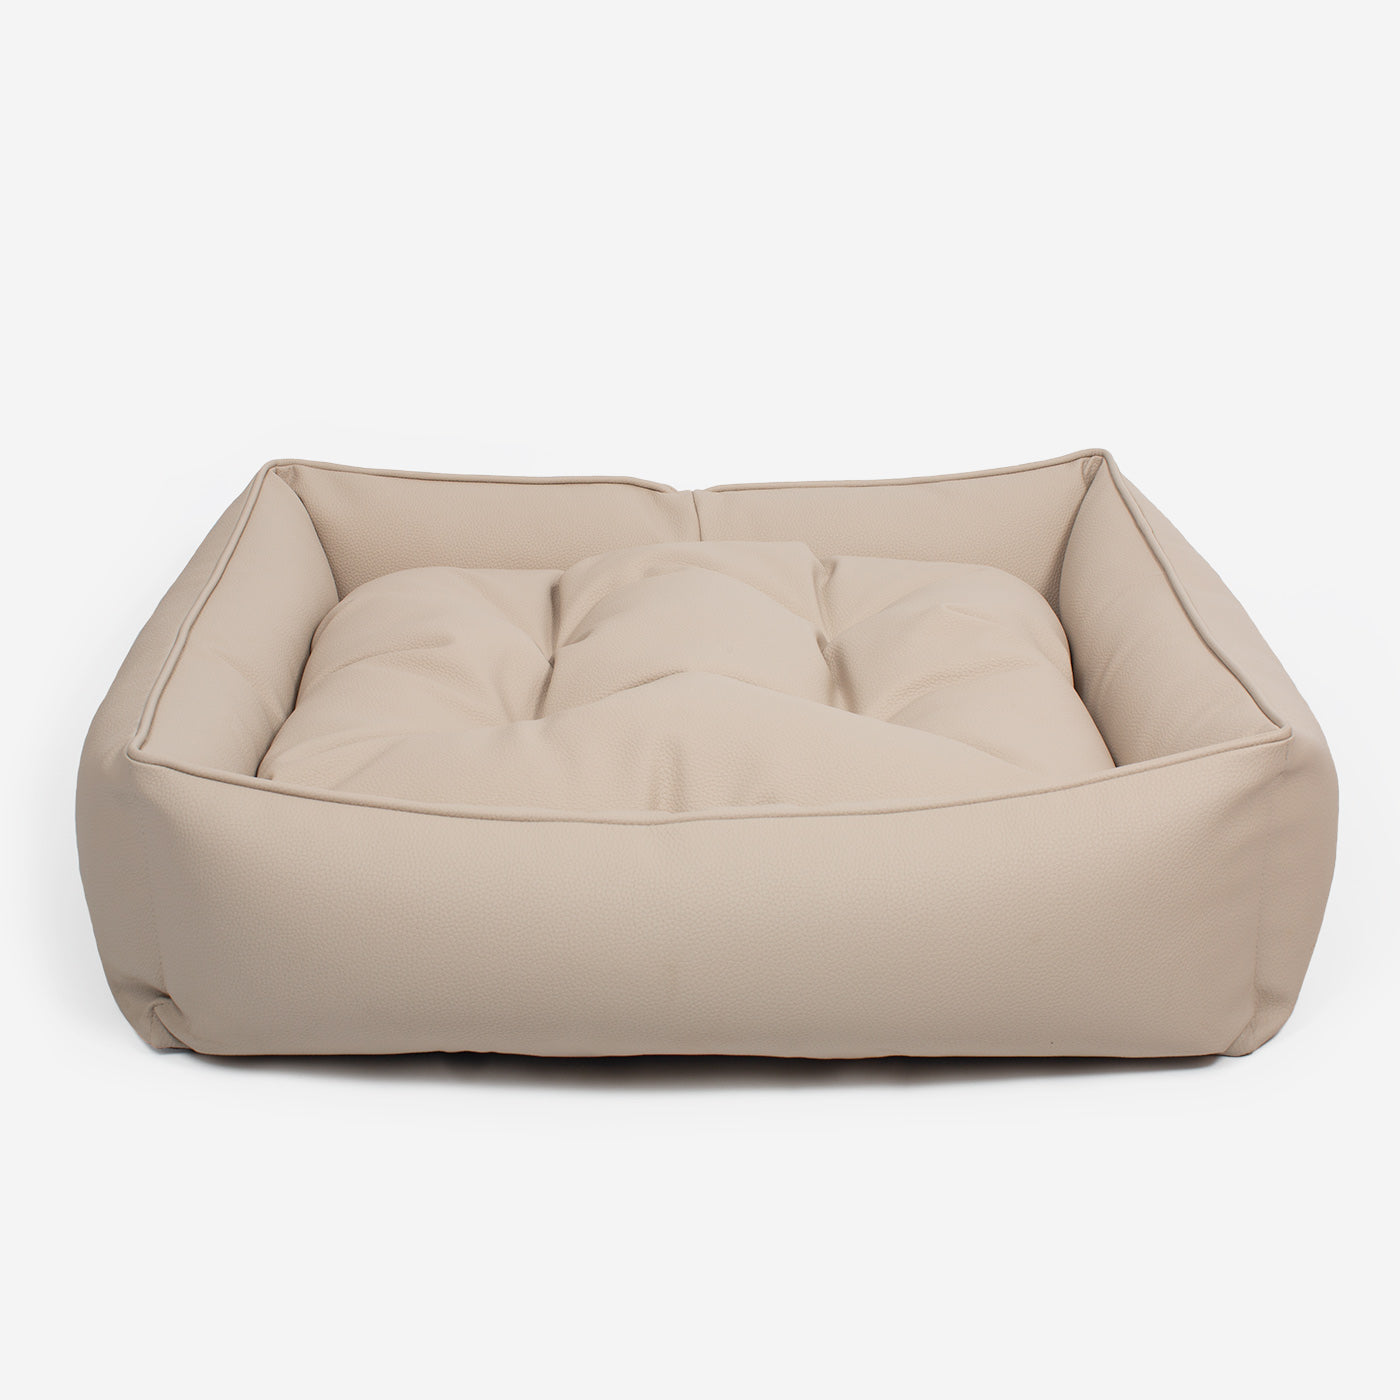 [color:sand] Luxury Handmade Box Bed in Rhino Tough Faux Leather, in Sand, Perfect For Your Pets Nap Time! Available To Personalise at Lords & Labradors